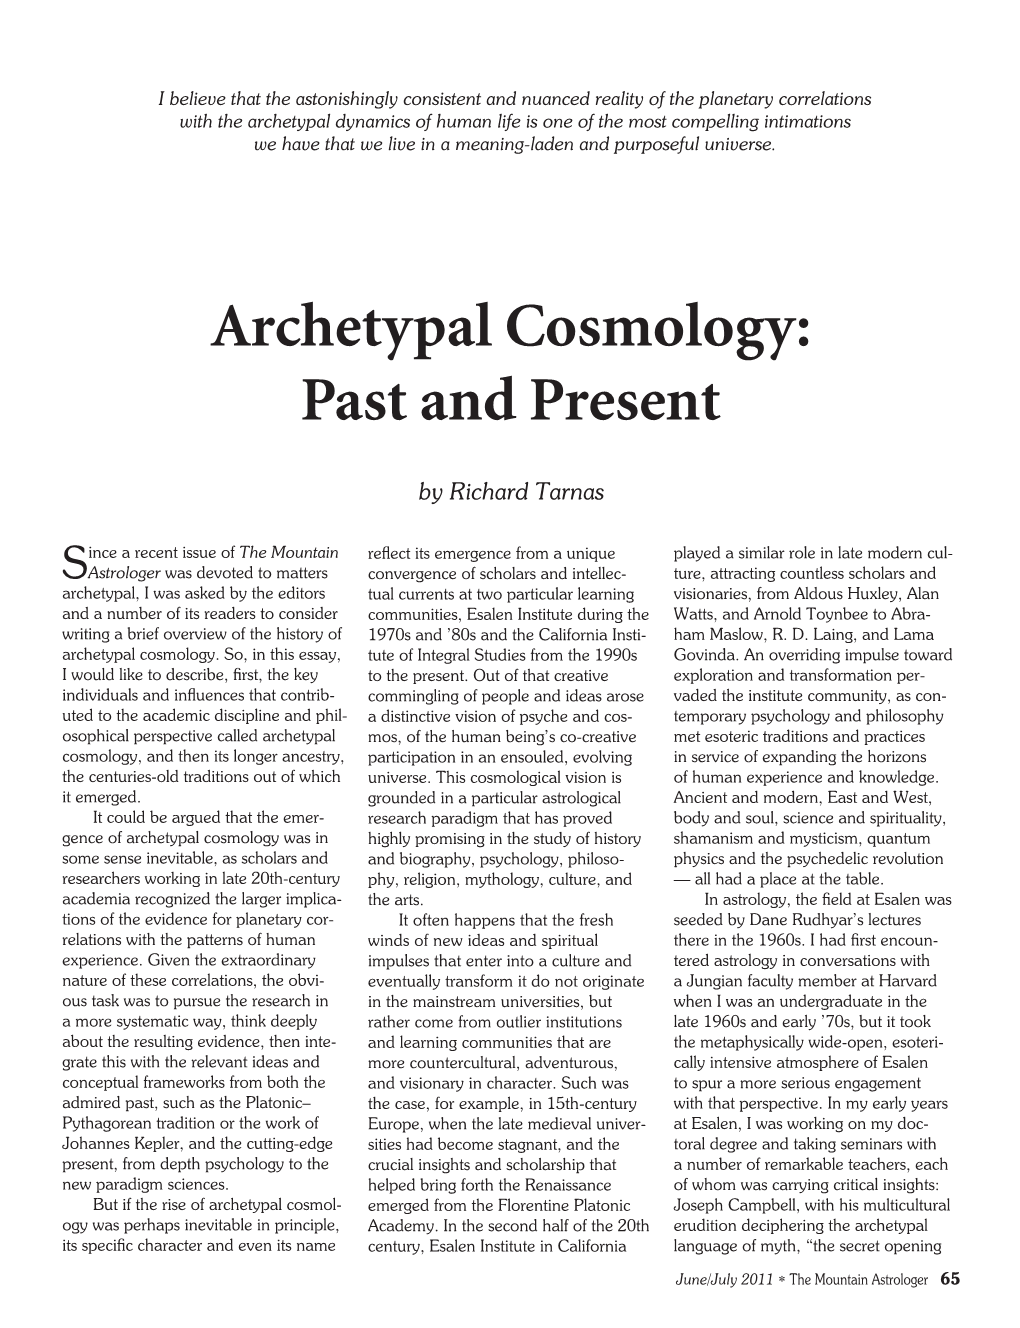 Archetypal Cosmology: Past and Present